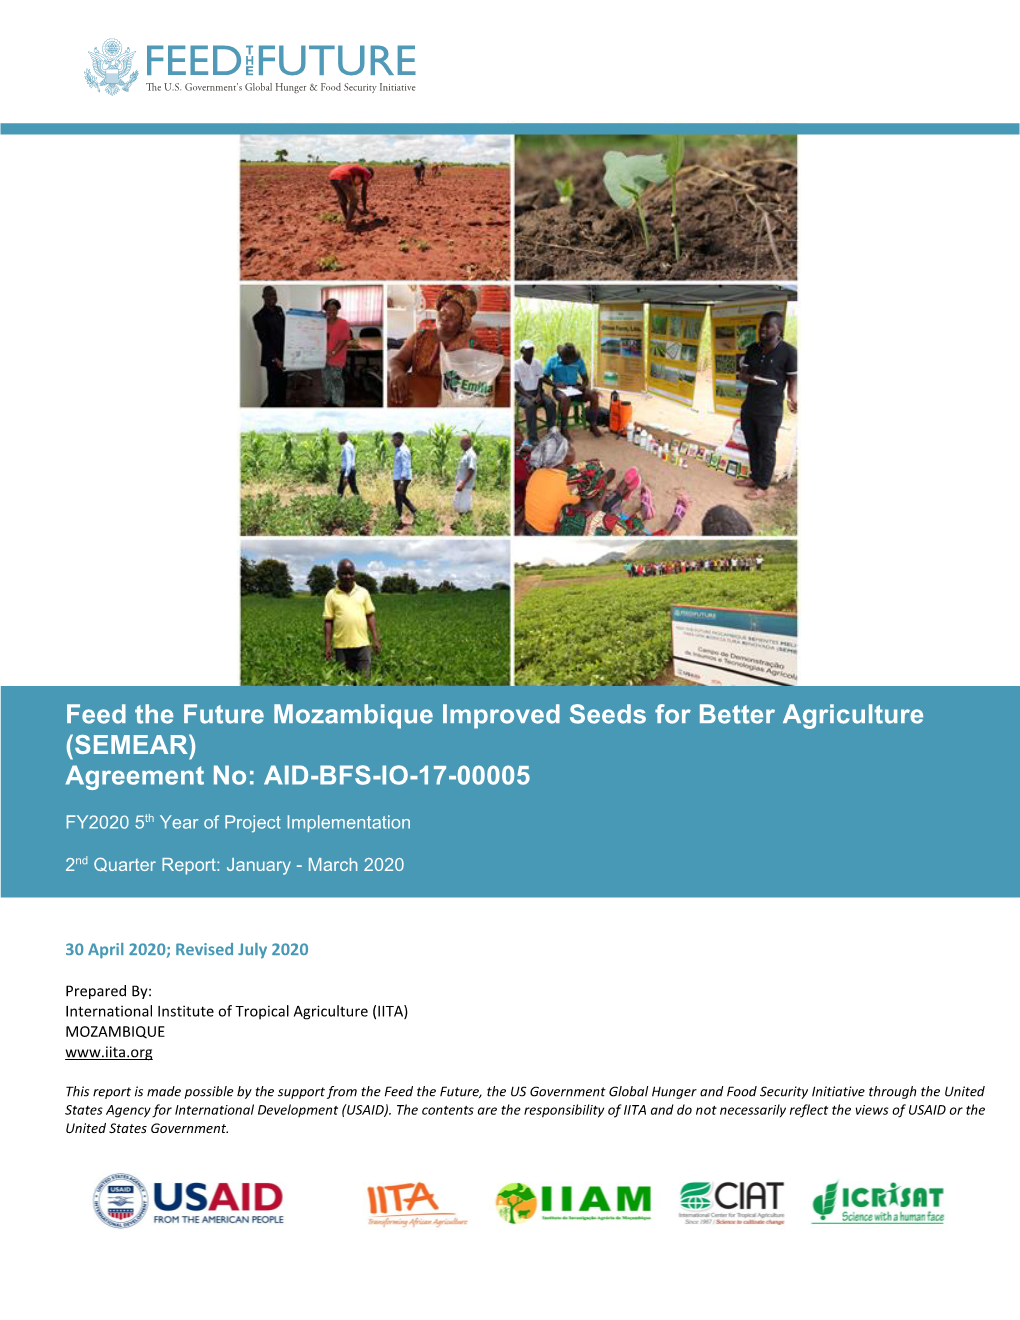 Feed the Future Mozambique Improved Seeds for Better Agriculture (SEMEAR) Agreement No: AID-BFS-IO-17-00005